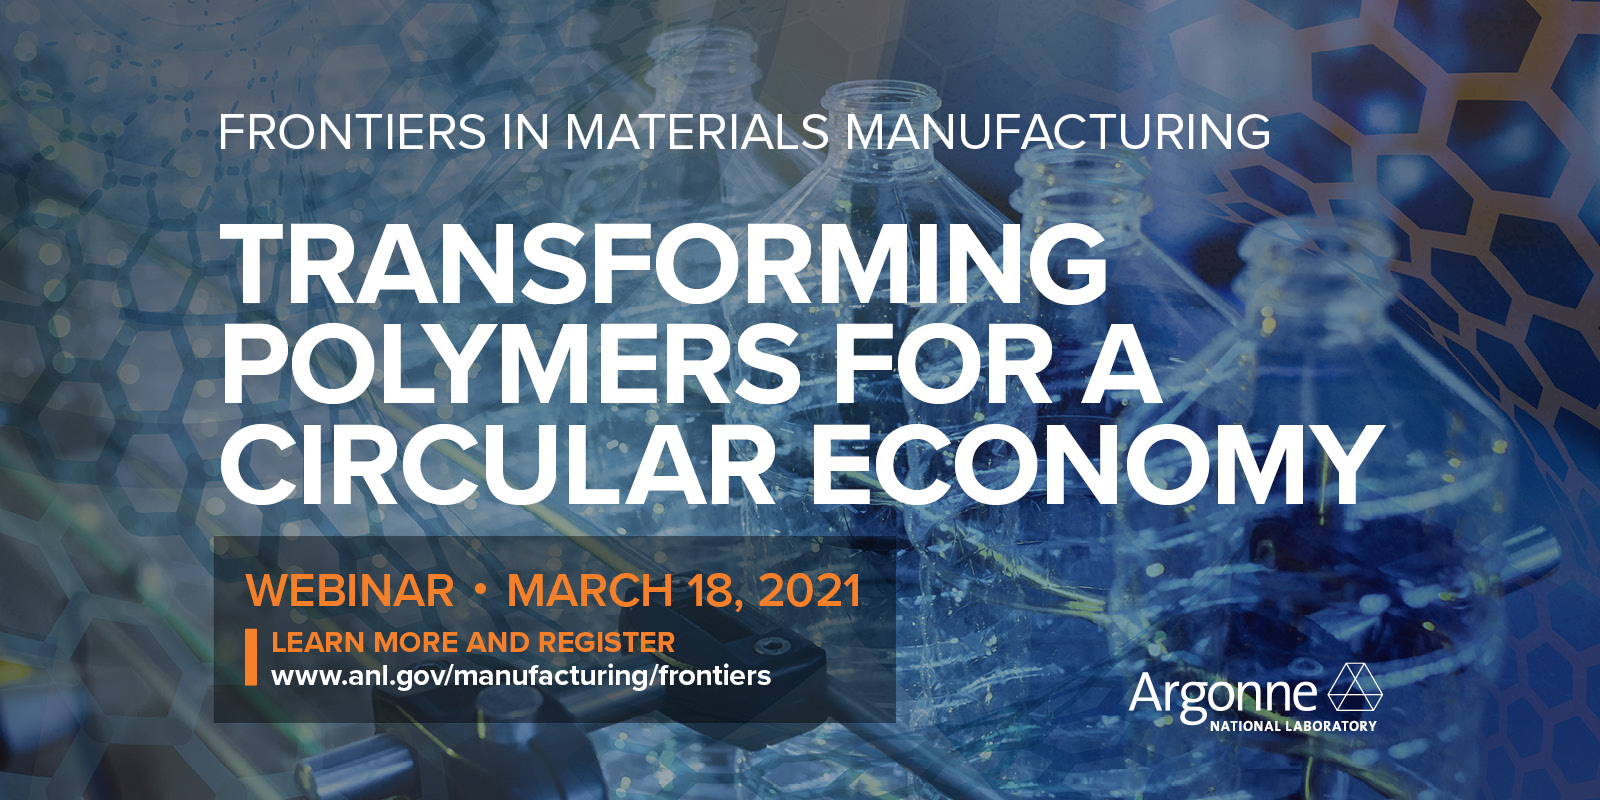 Transforming Polymers for a Circular Economy